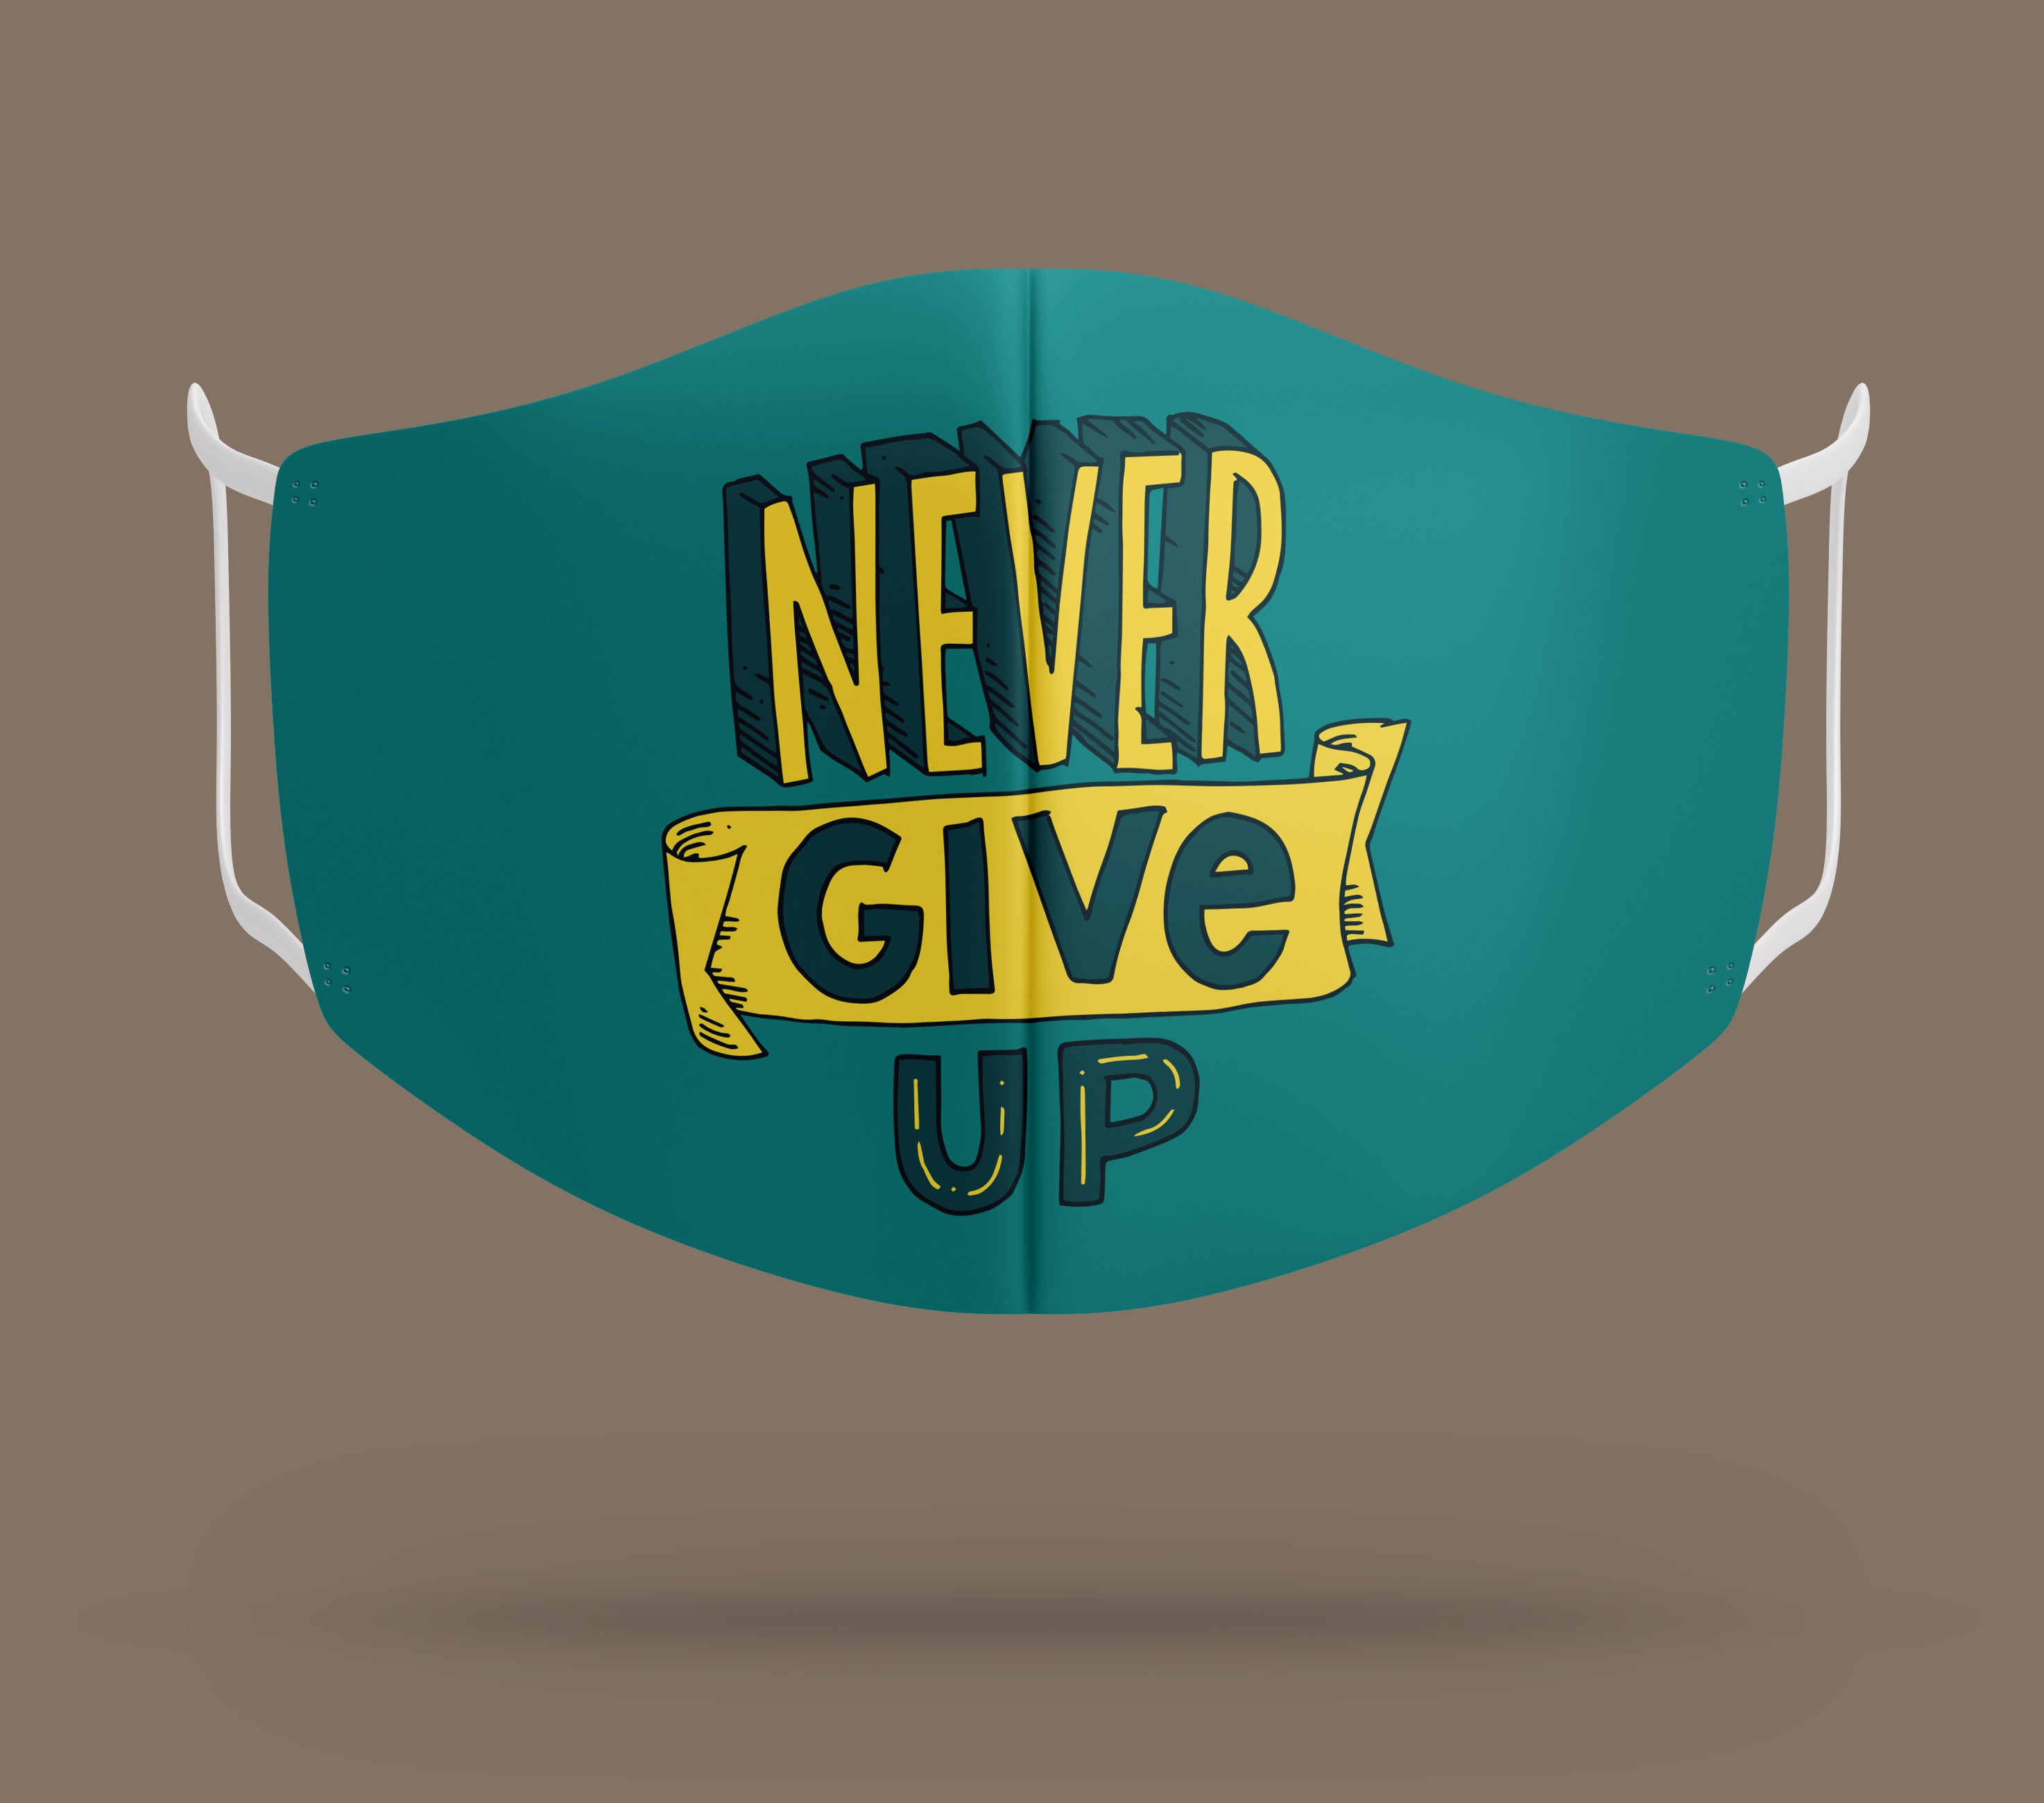 Never Give Up Premium Mask (Pack of 3 )